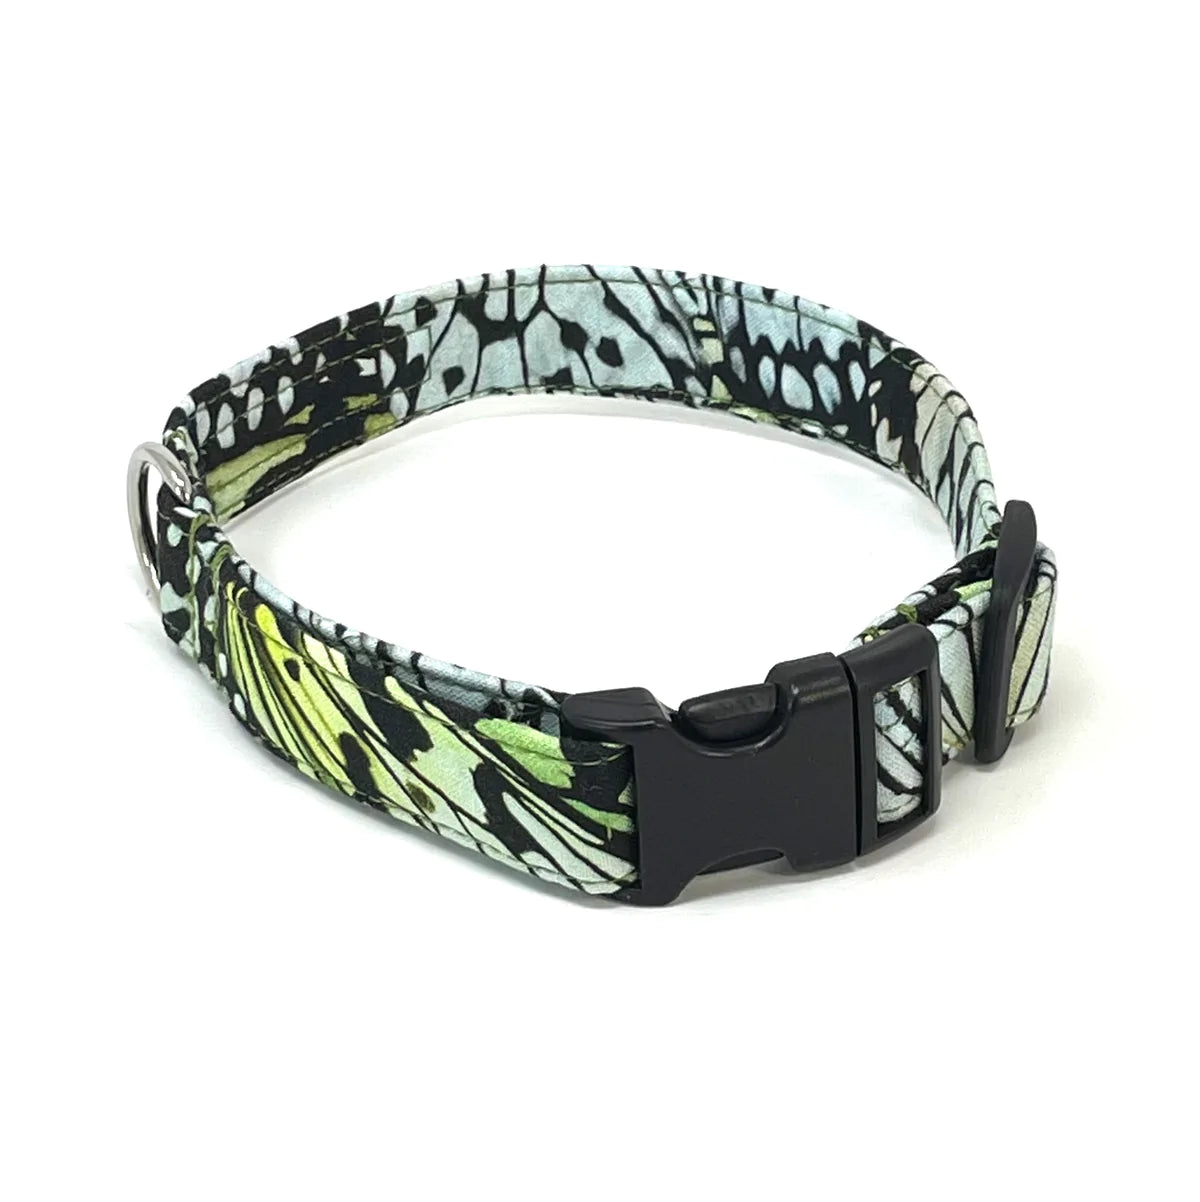 Handcrafted fabric dog collar by wiff waff designs with shiny chrome d ring and black triglide and clip. Green and black butterfly print.